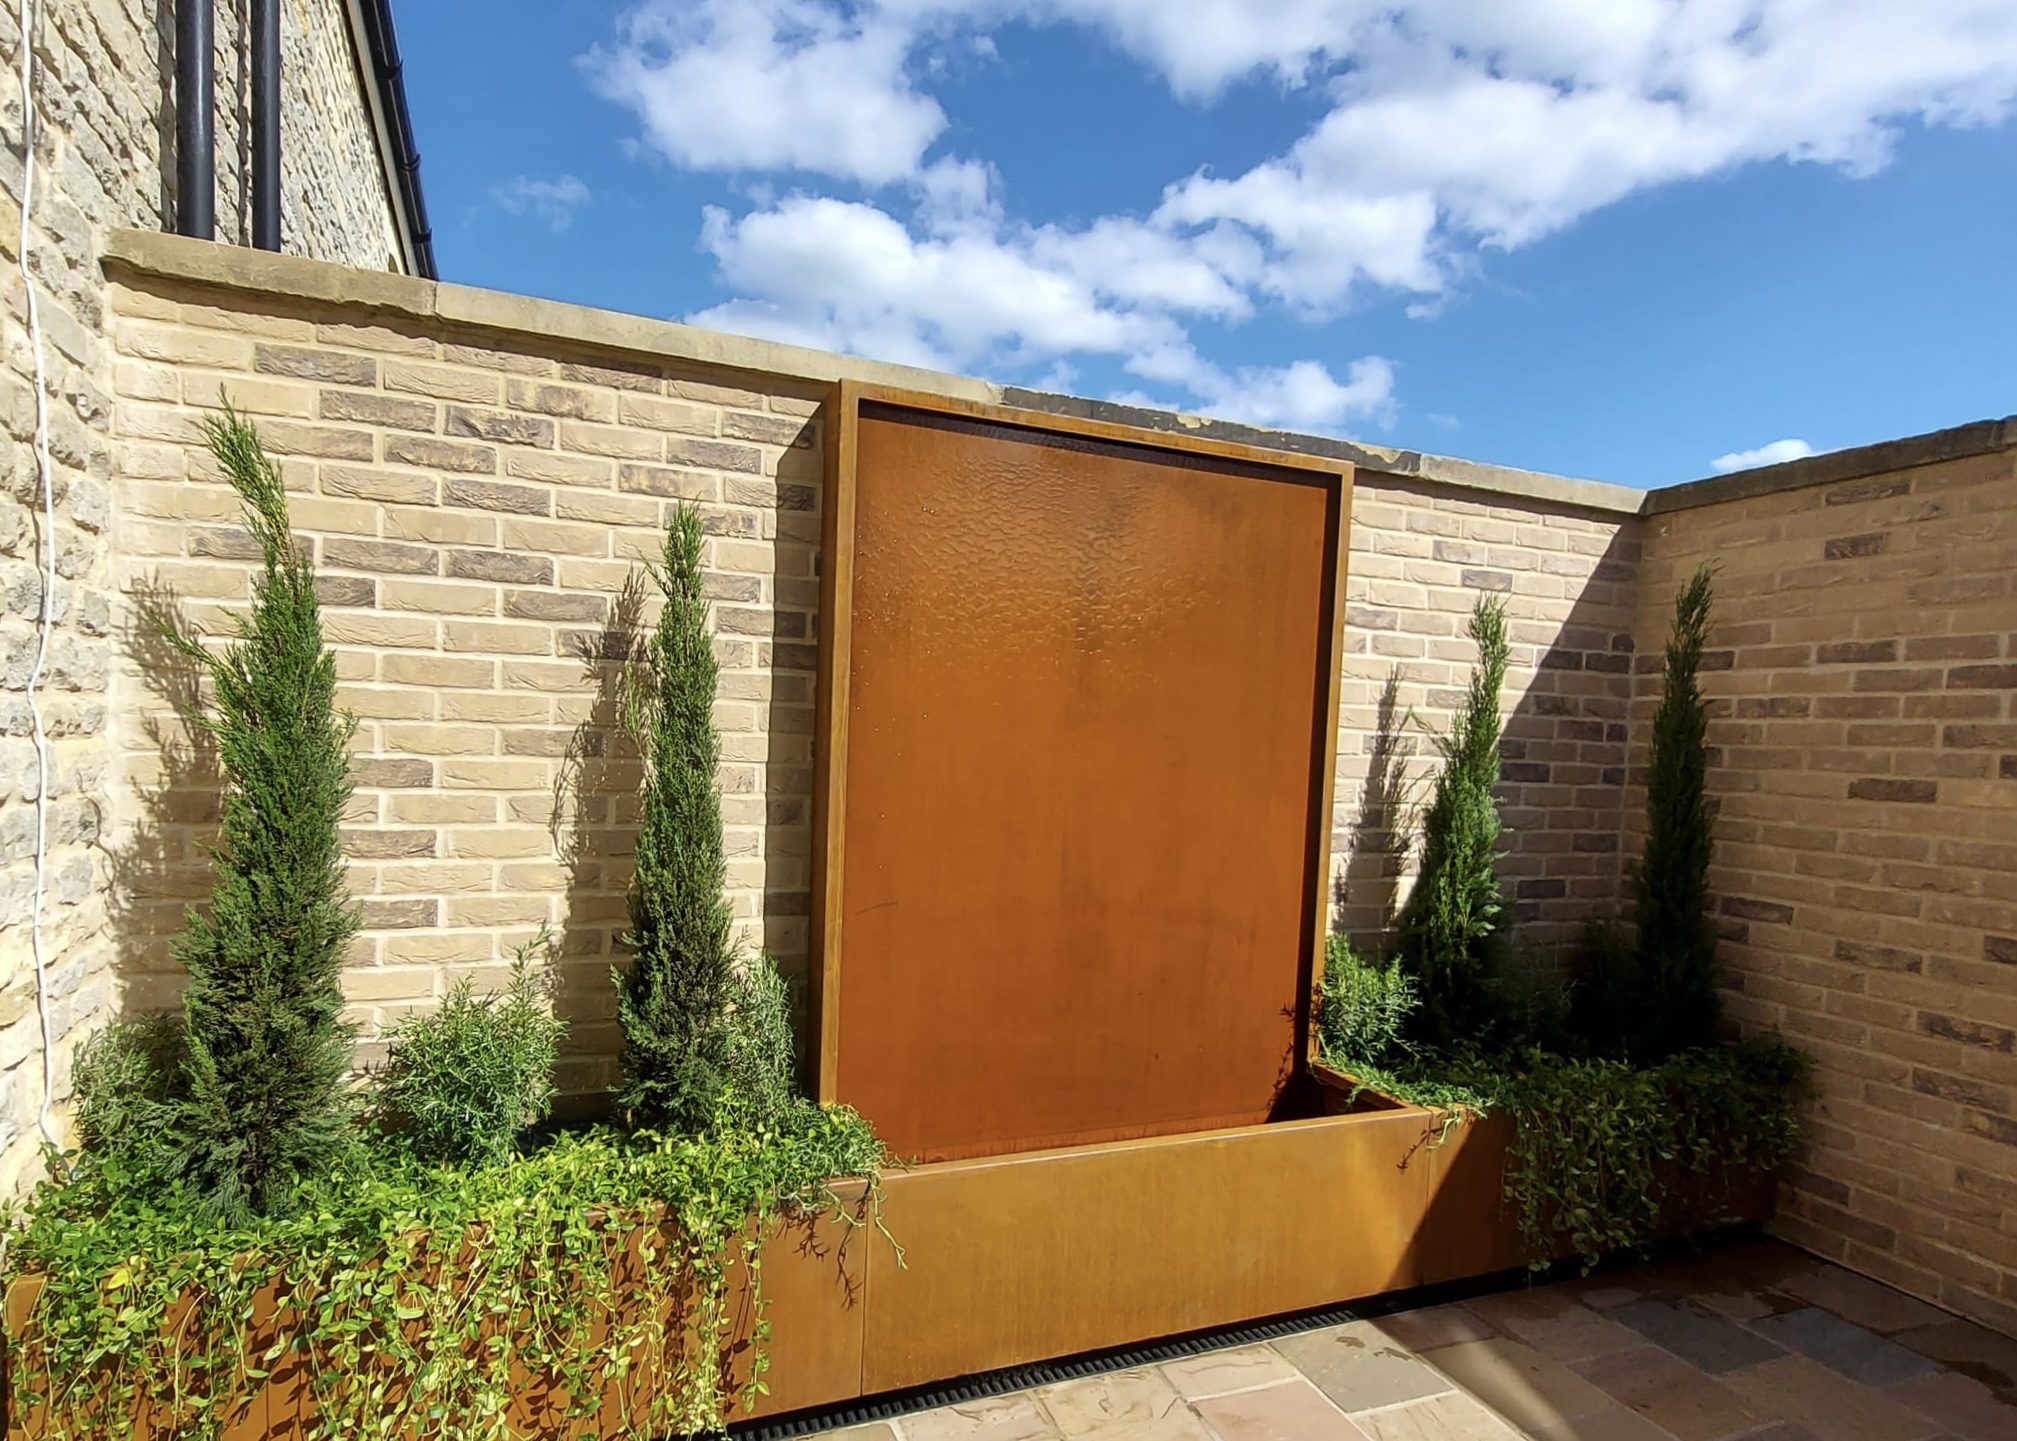 Corten water wall with side planters